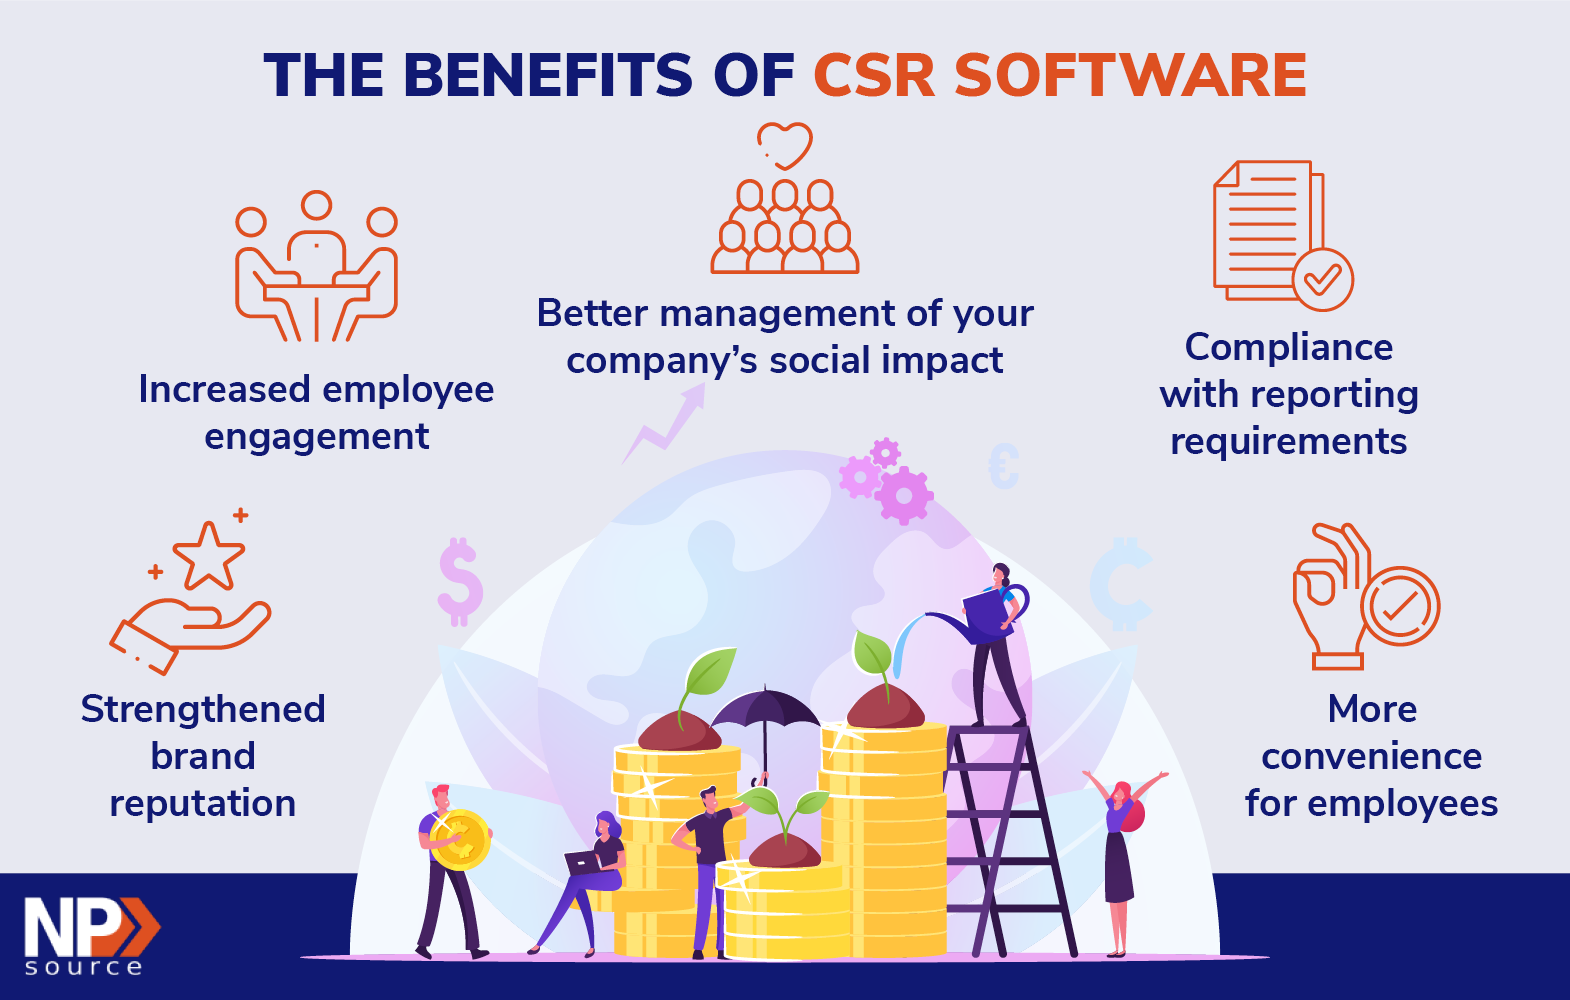 This graphic outlines the benefits of using CSR software, such as increased employee engagement and strengthened brand reputation.